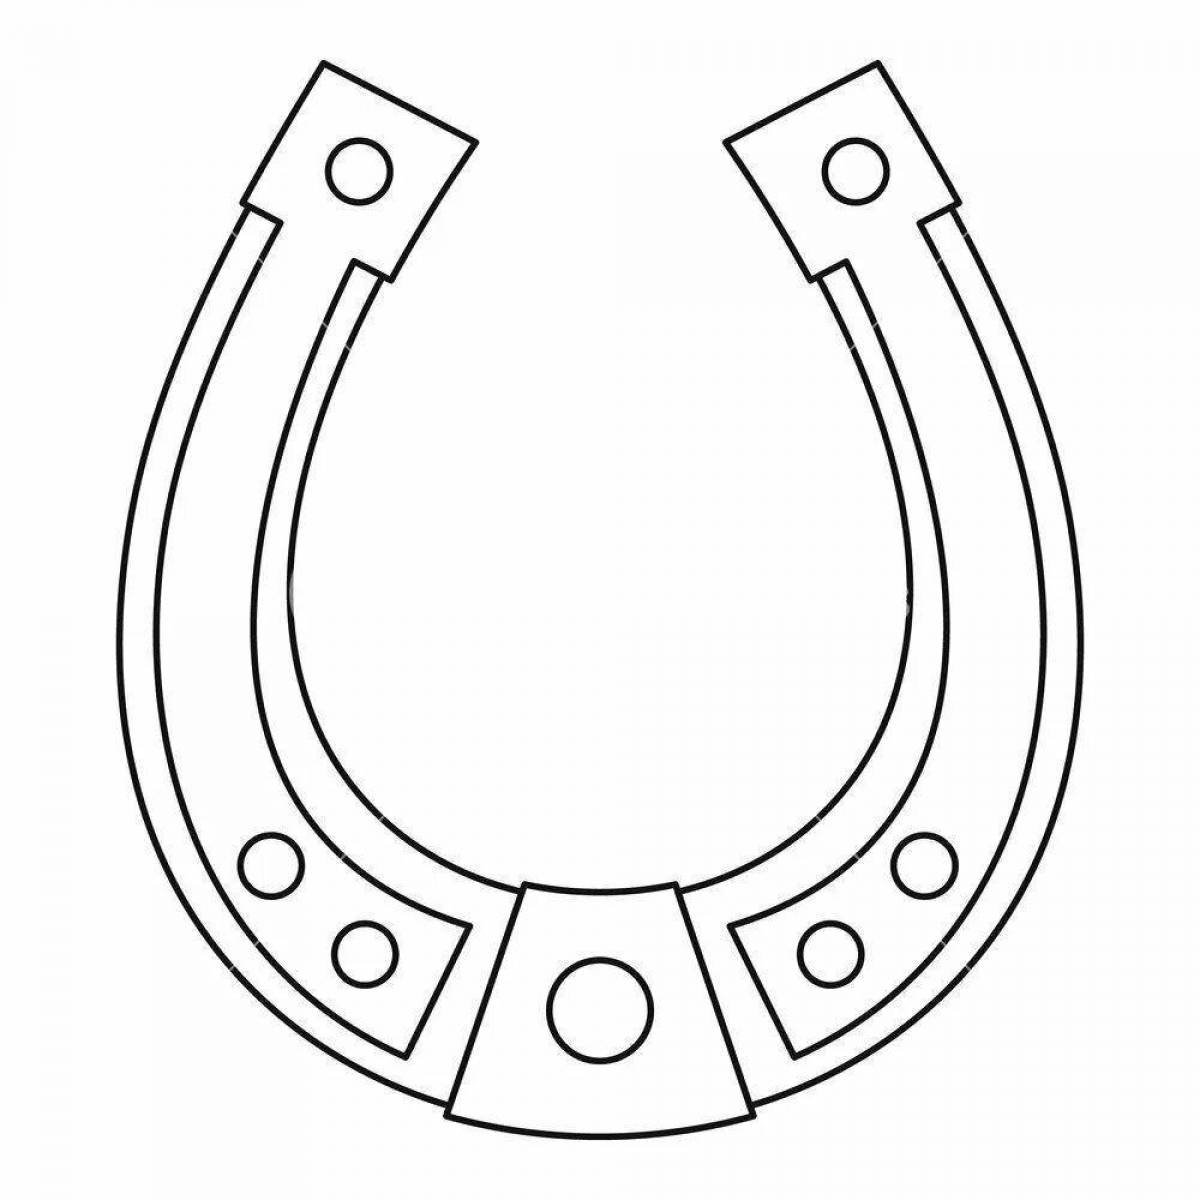 Great horseshoe coloring book for kids